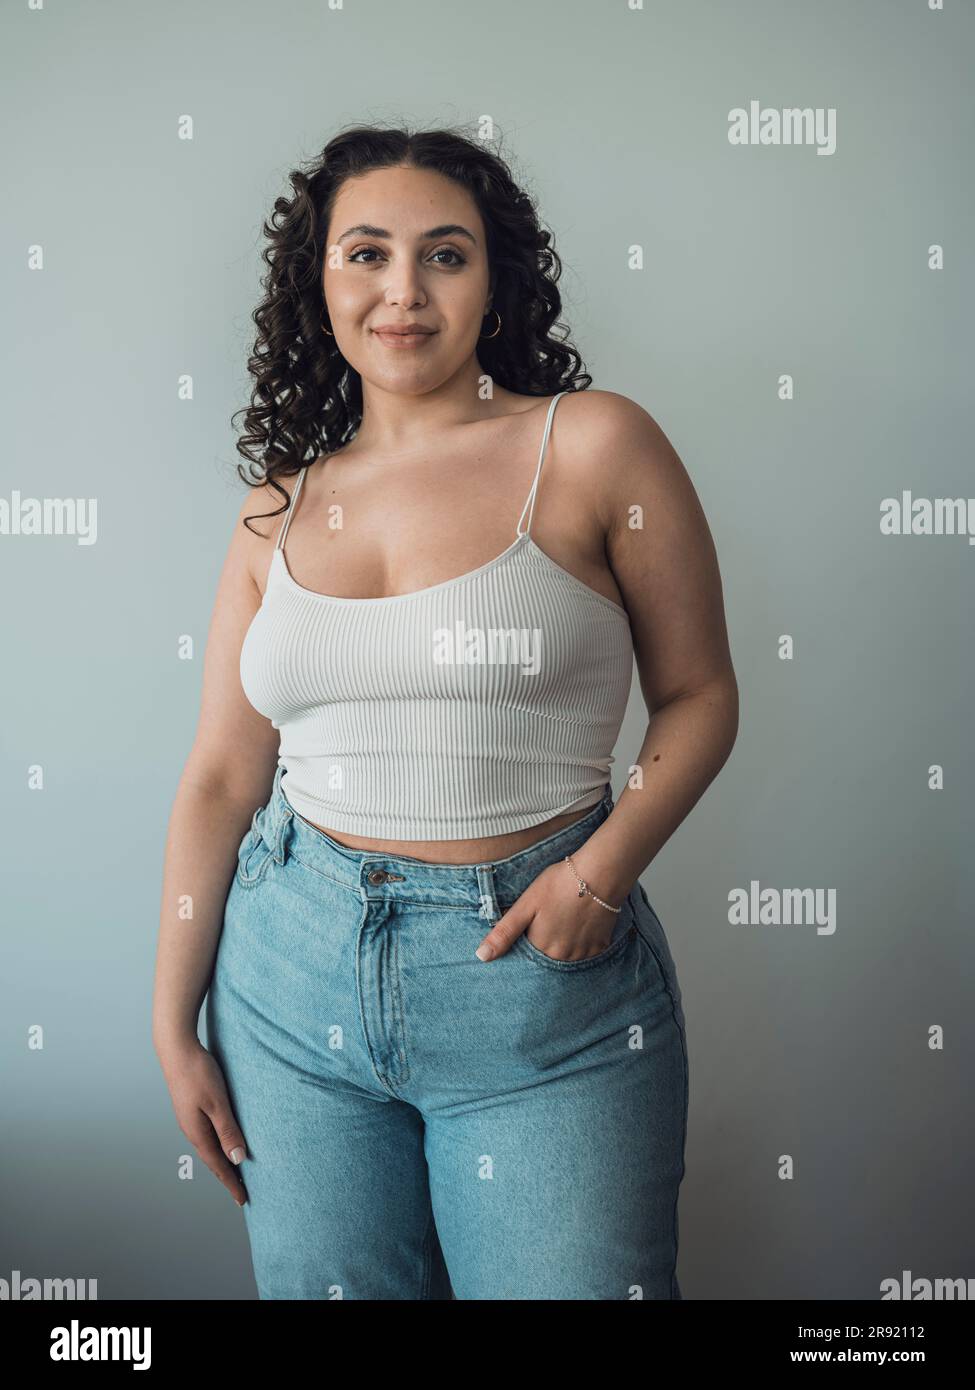 https://c8.alamy.com/comp/2R92112/curvy-woman-with-hand-in-pocket-standing-in-front-of-wall-2R92112.jpg